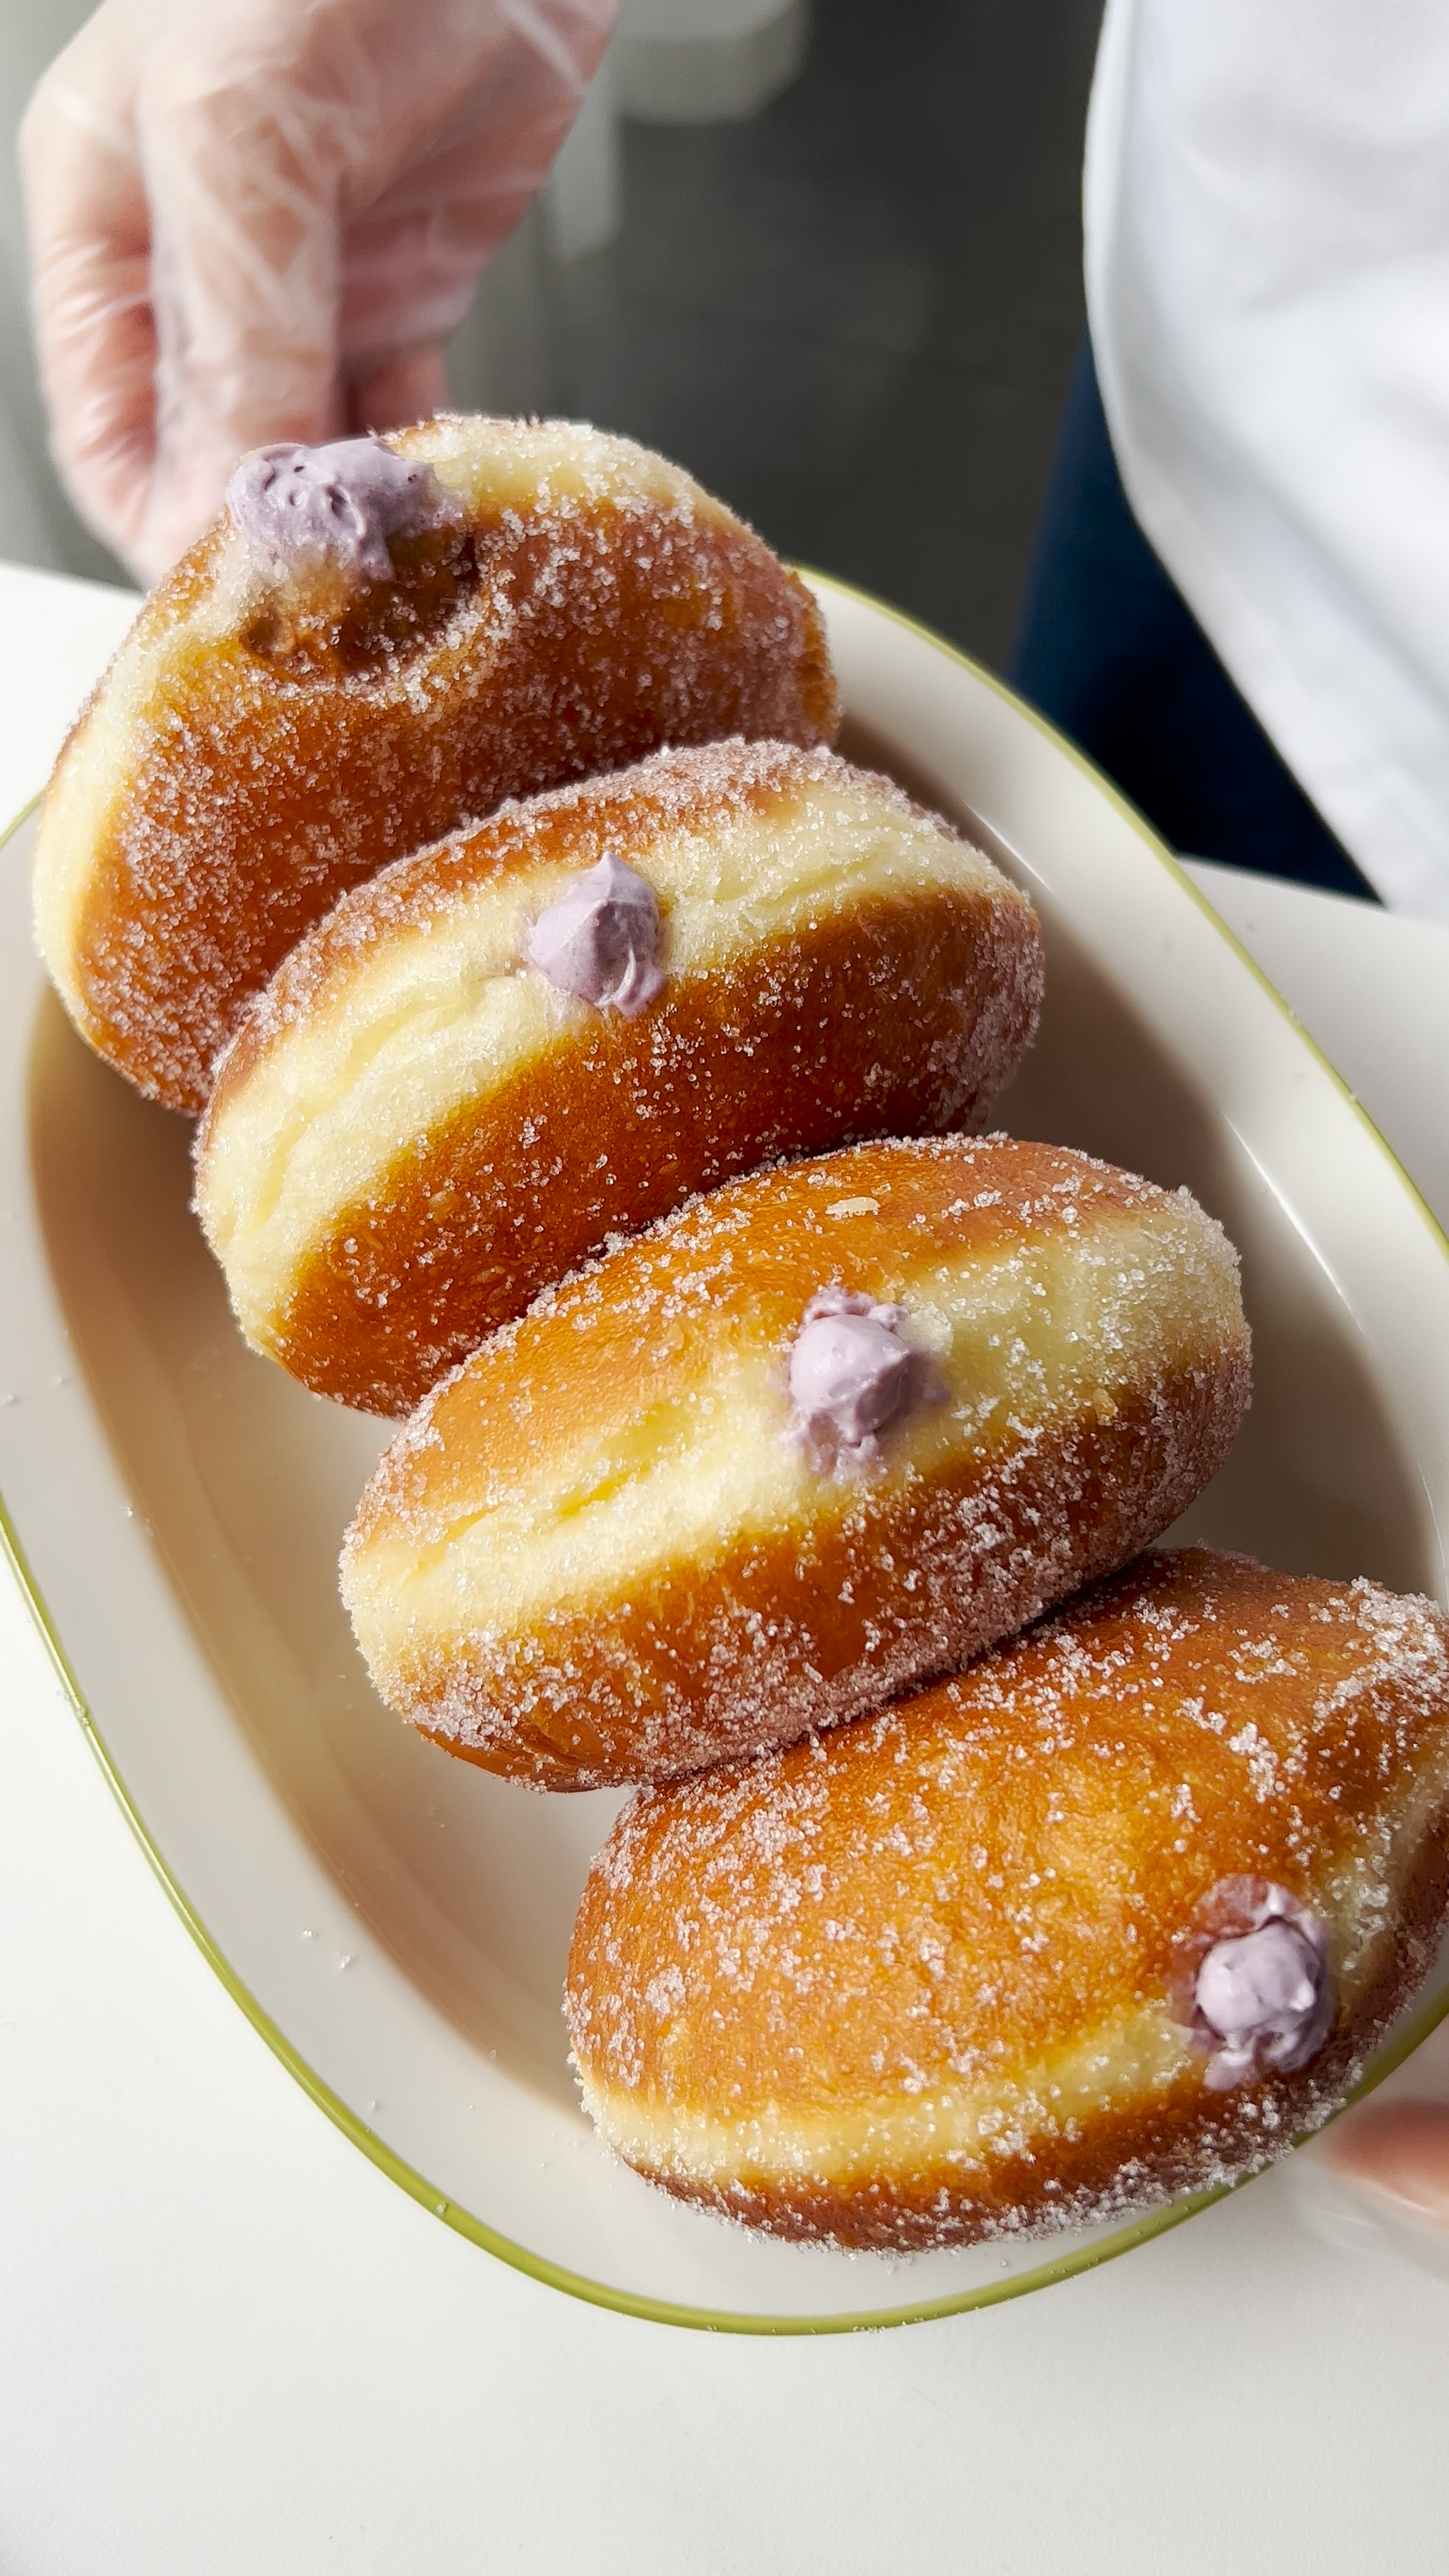 Image of Fried Donuts with Homemade Blueberry Jam Filling